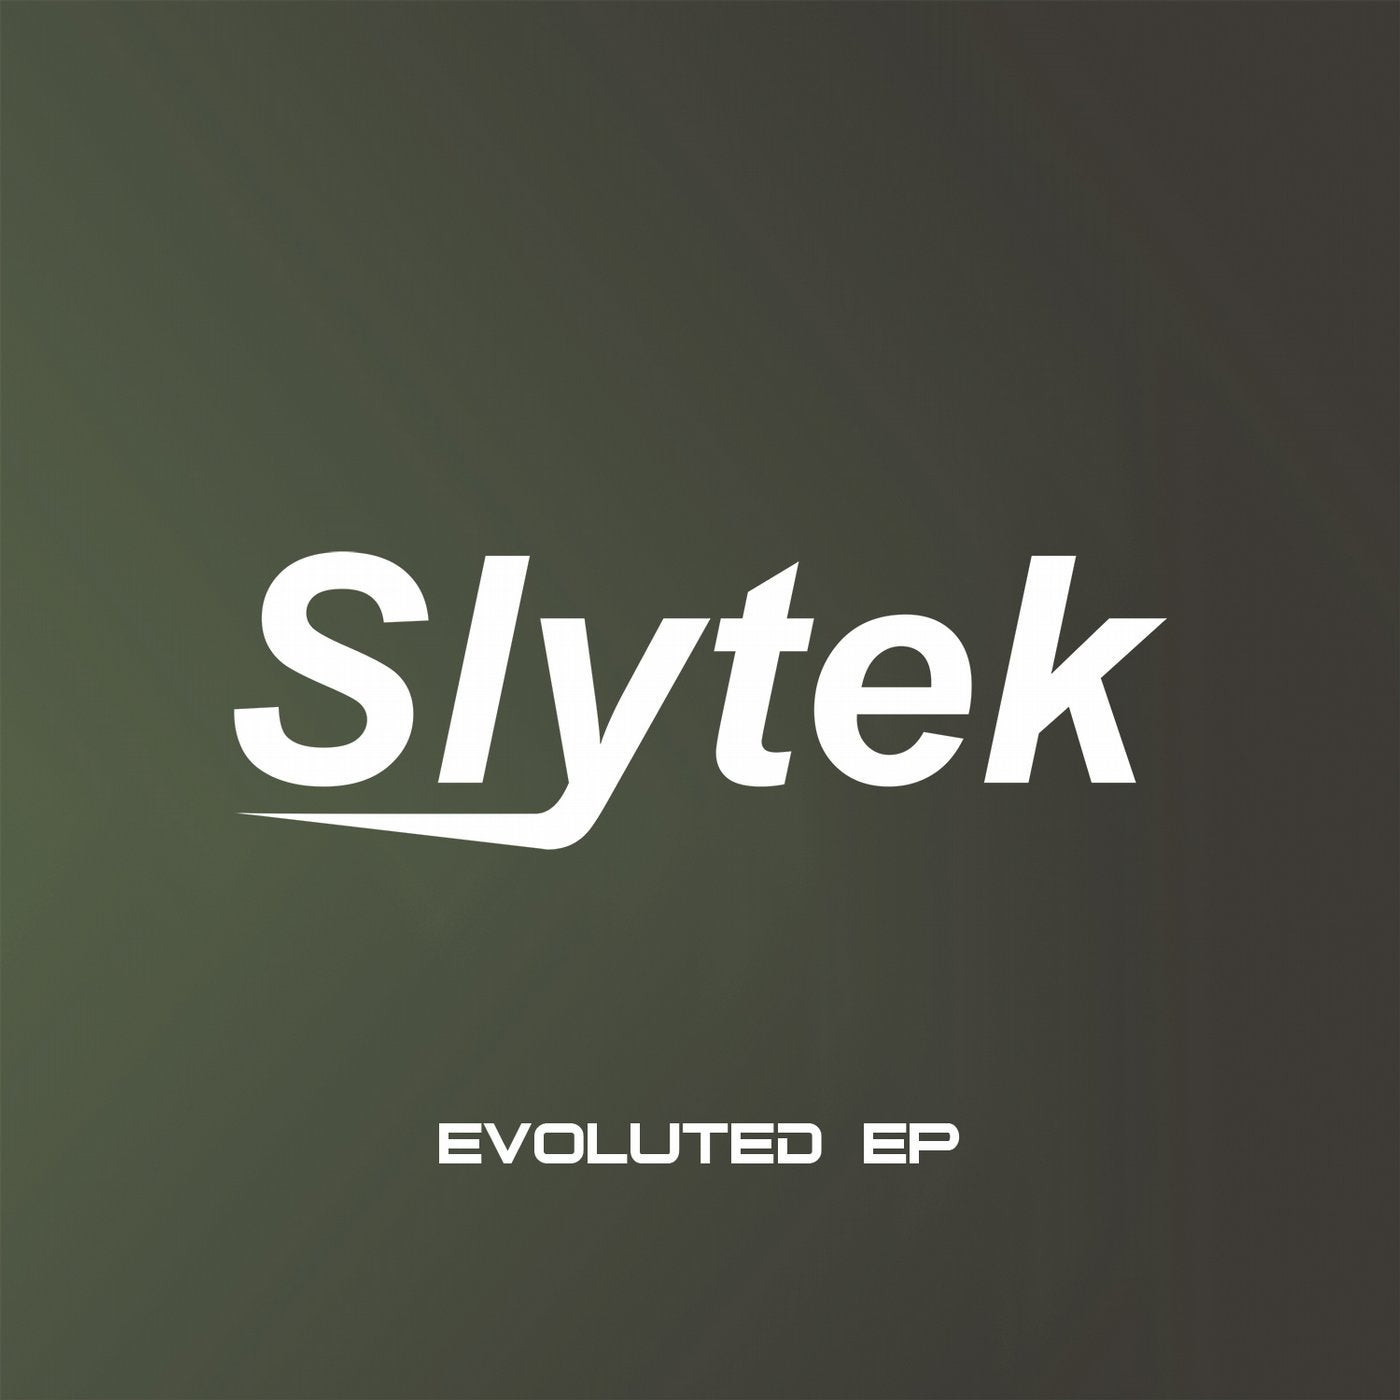 Evoluted EP